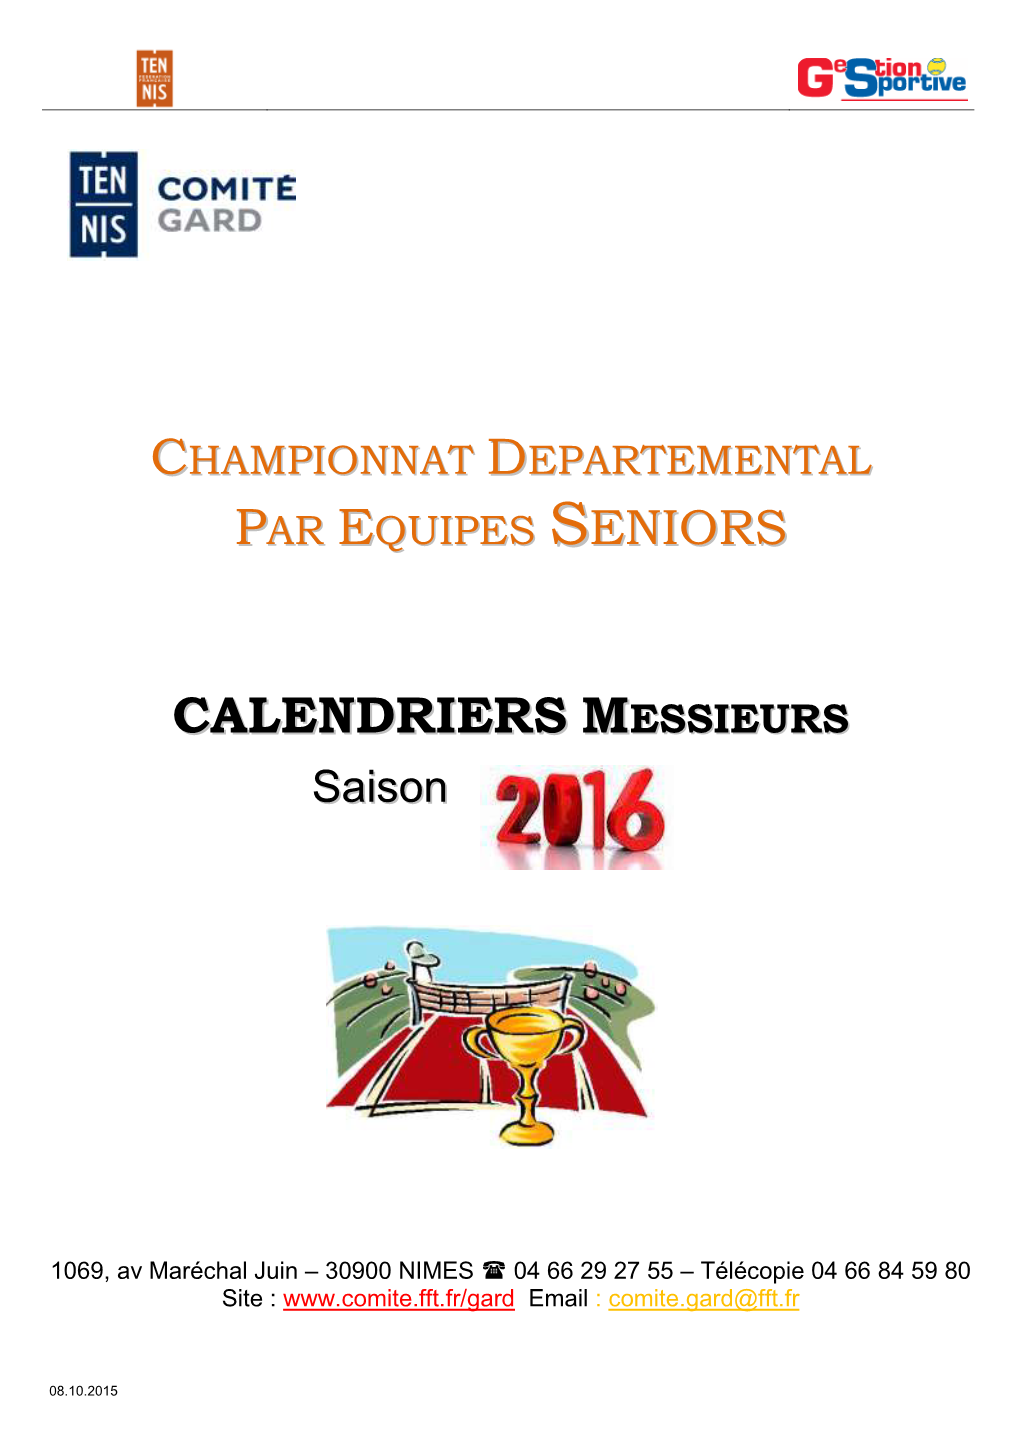 Calendriers Messieurs